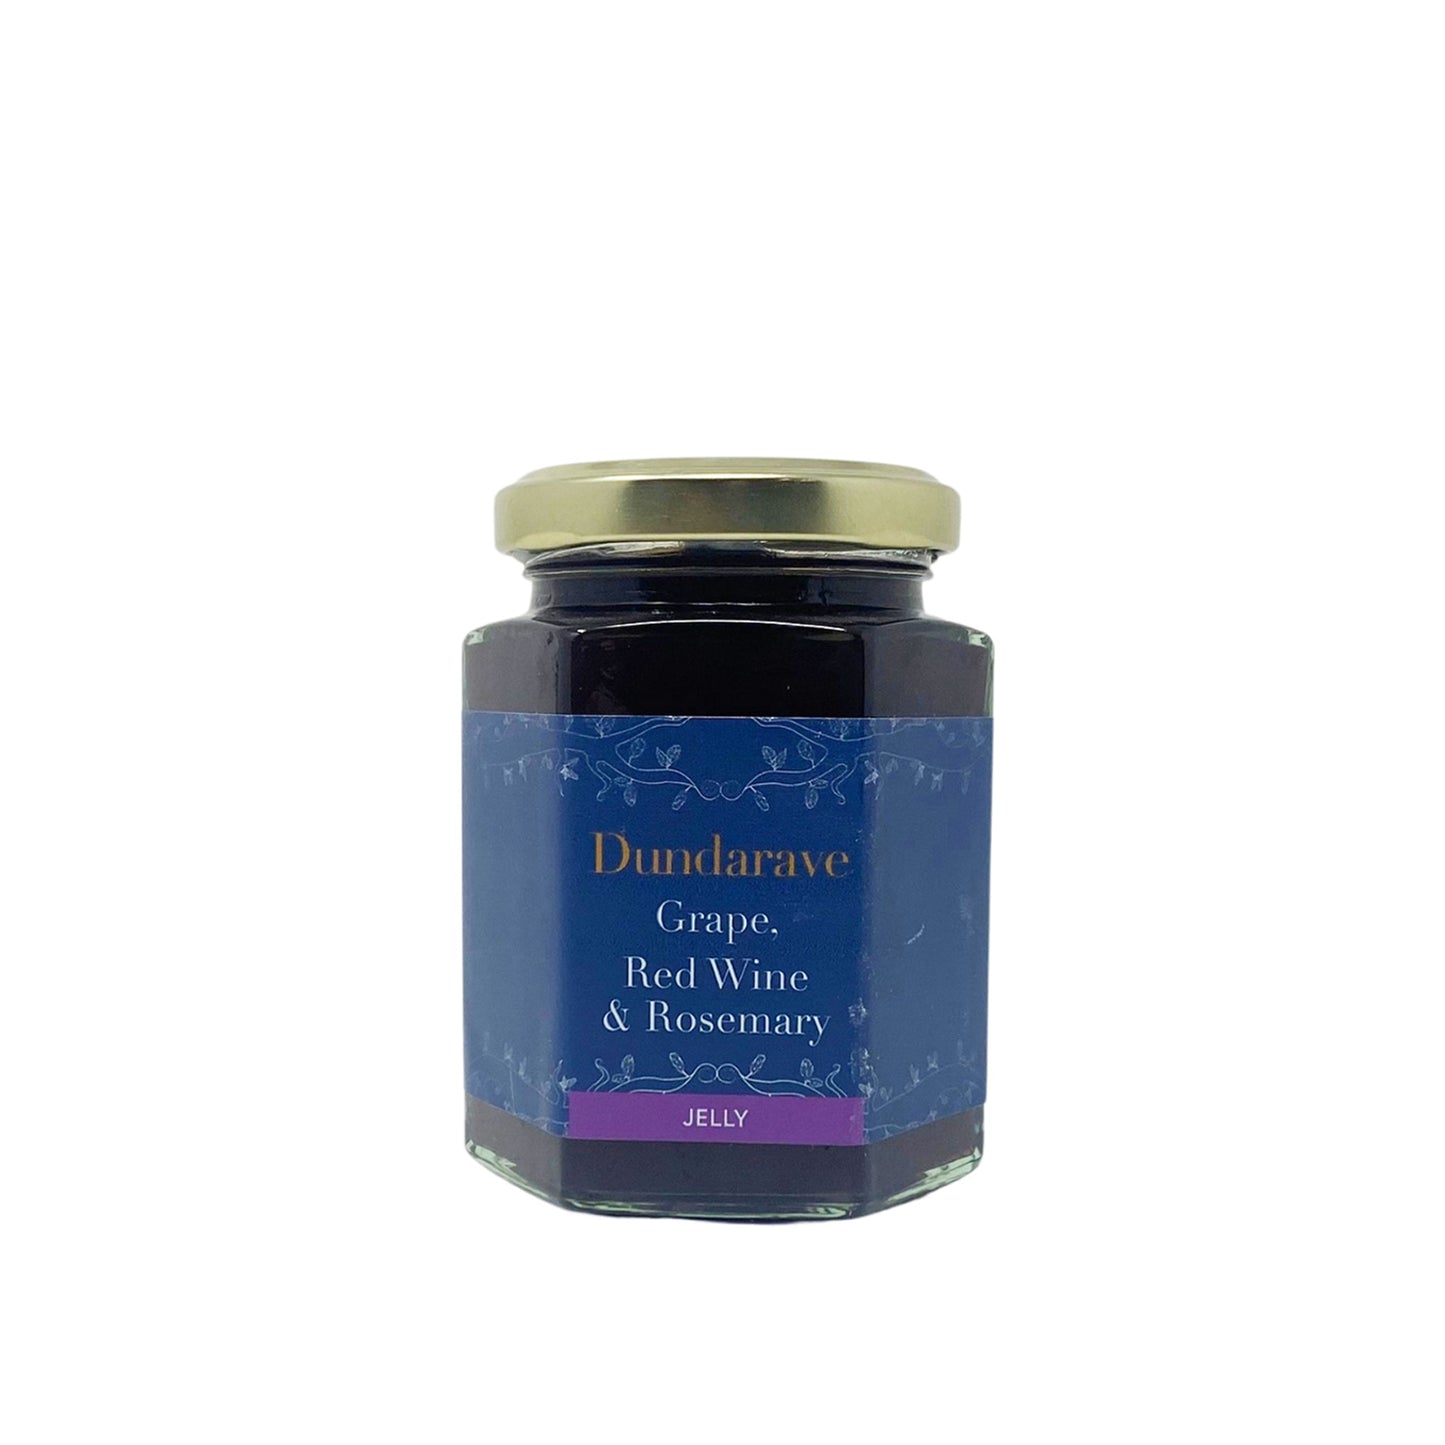 Dundarave Grape, Red Wine & Rosemary Jelly